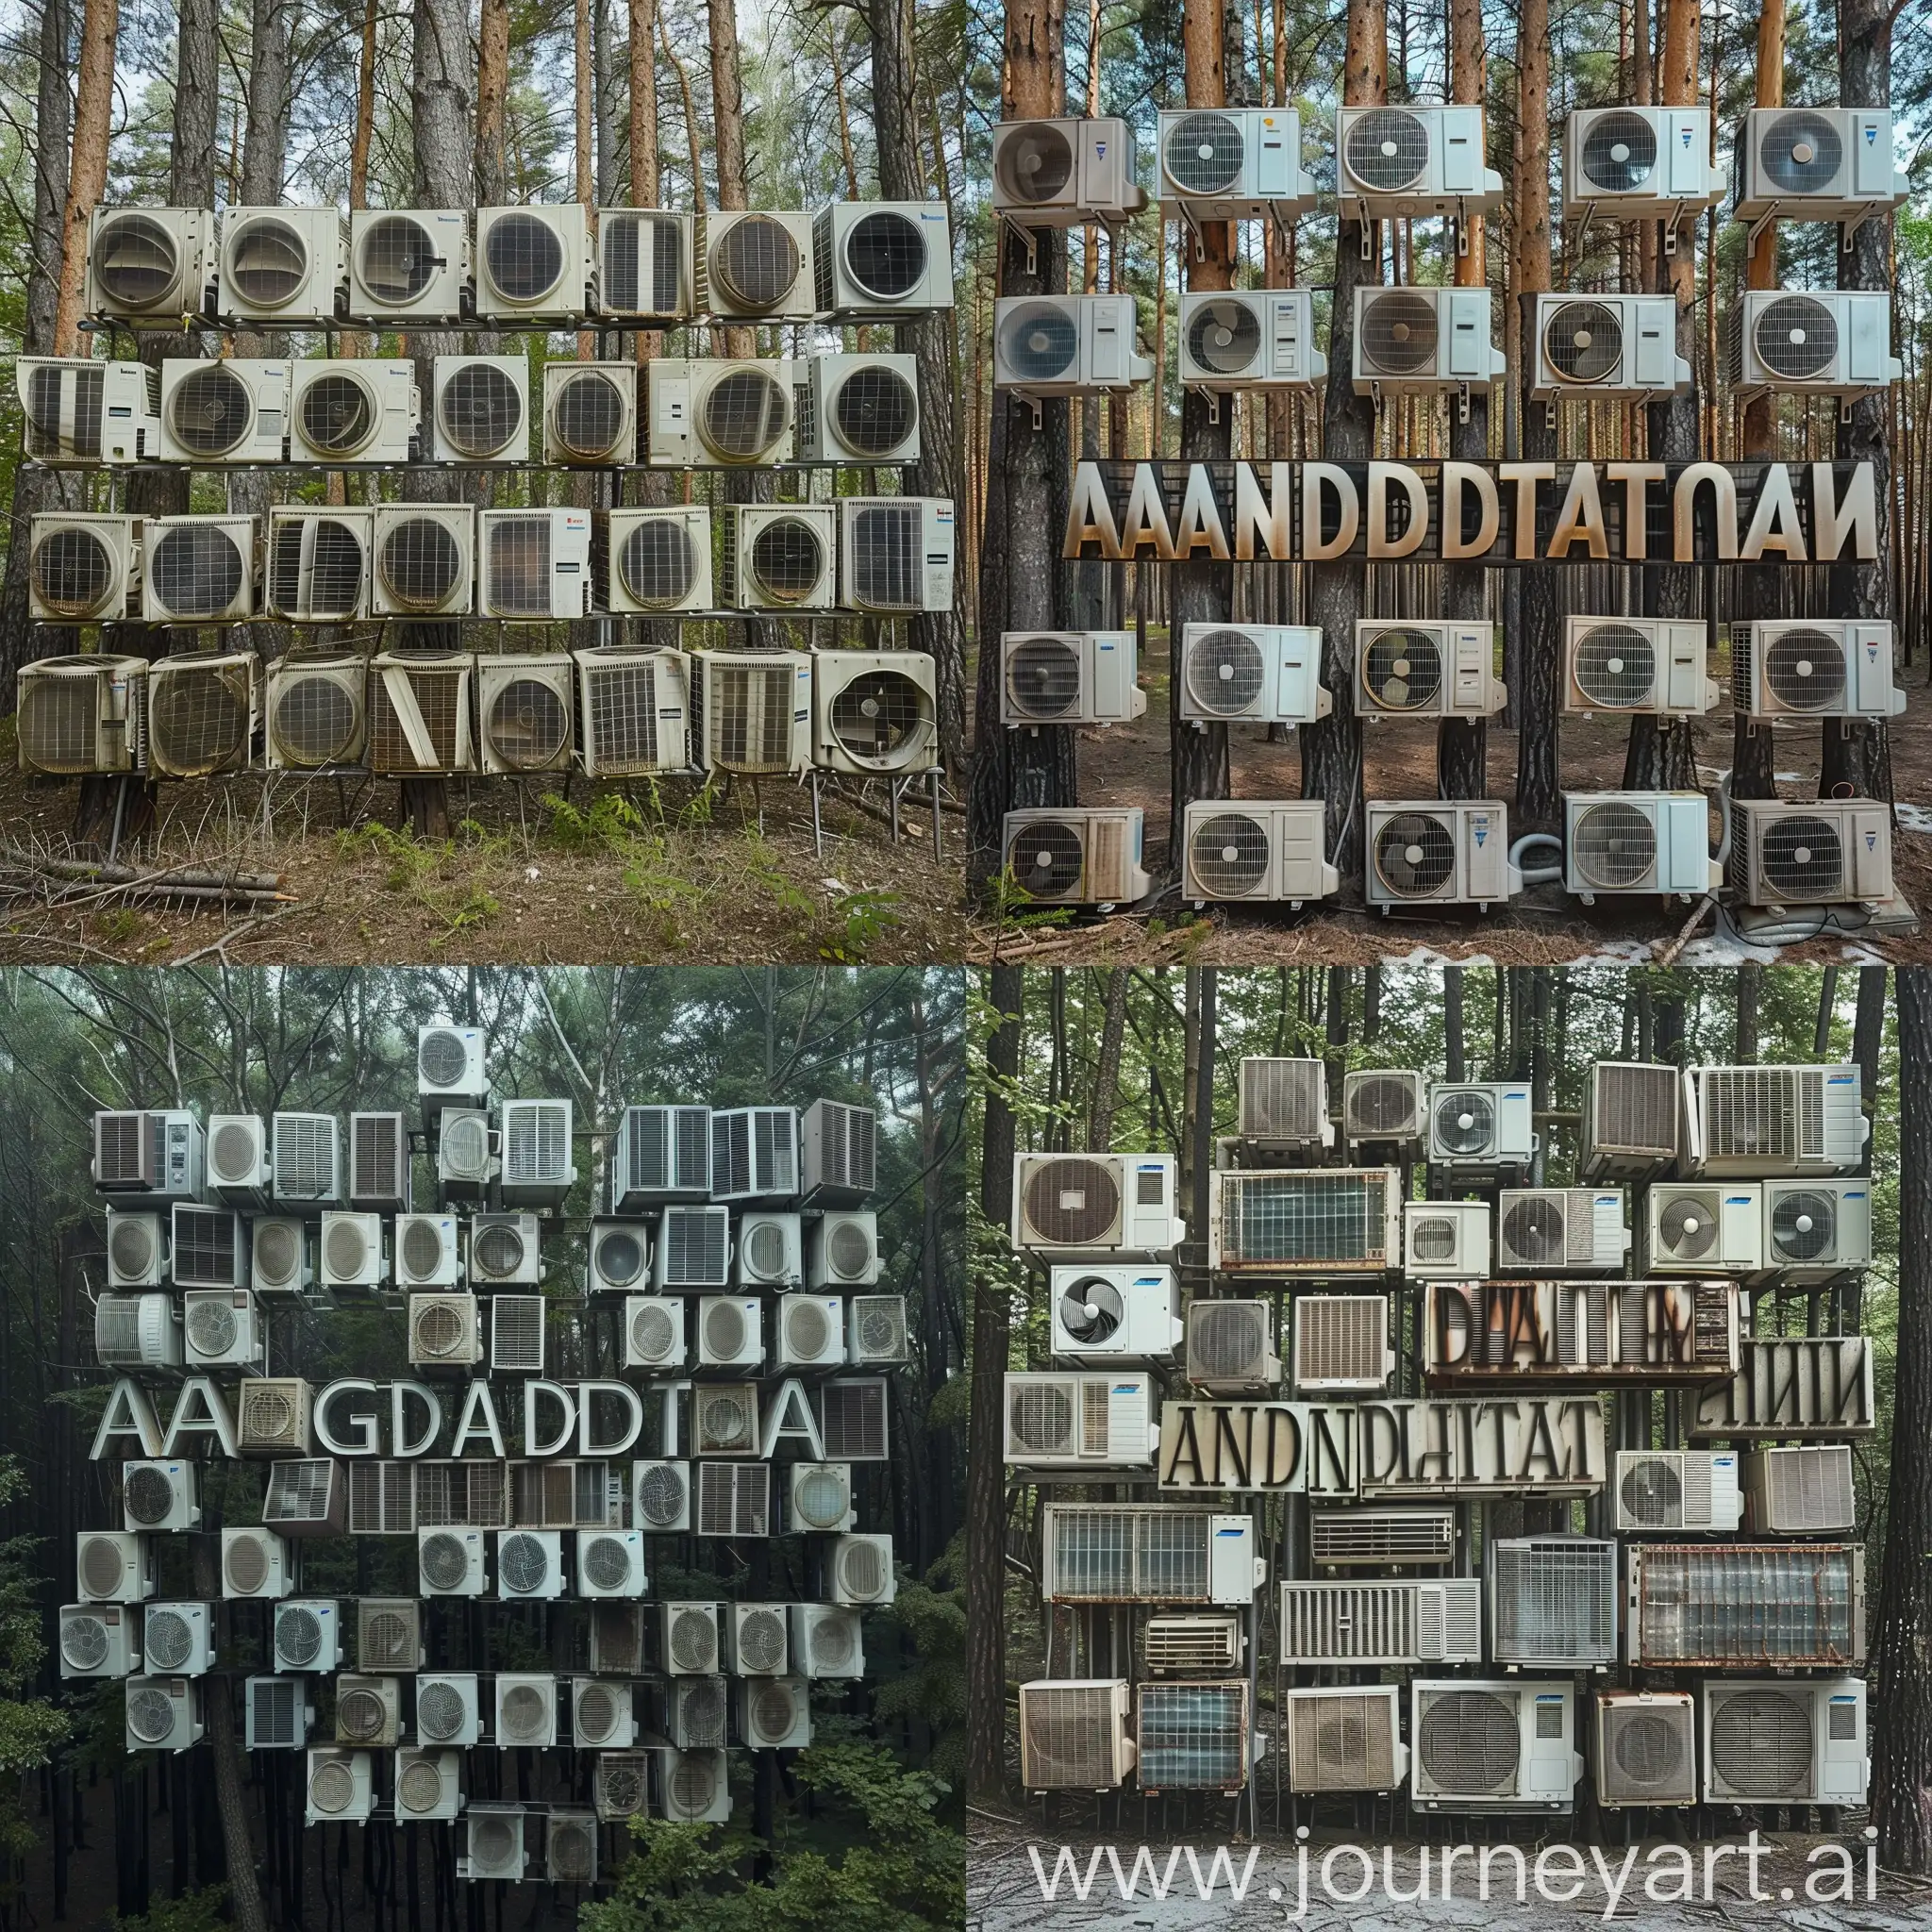 Using a large number of air conditioners, lay out the word "Кандидаты" against the background of the forest